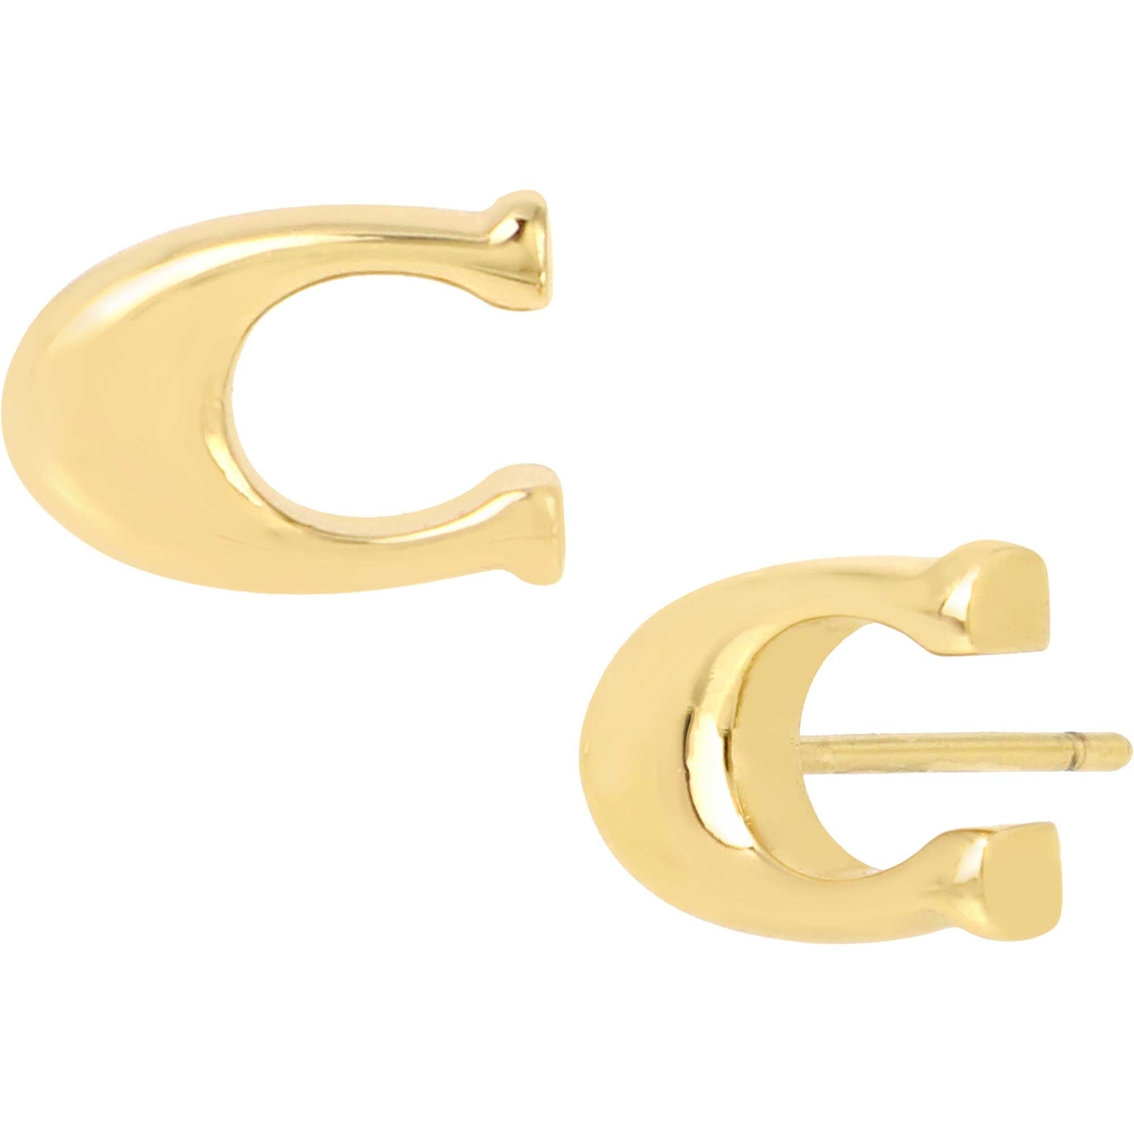 Coach Signature C Stud Earrings, Fashion Earrings, Jewelry & Watches